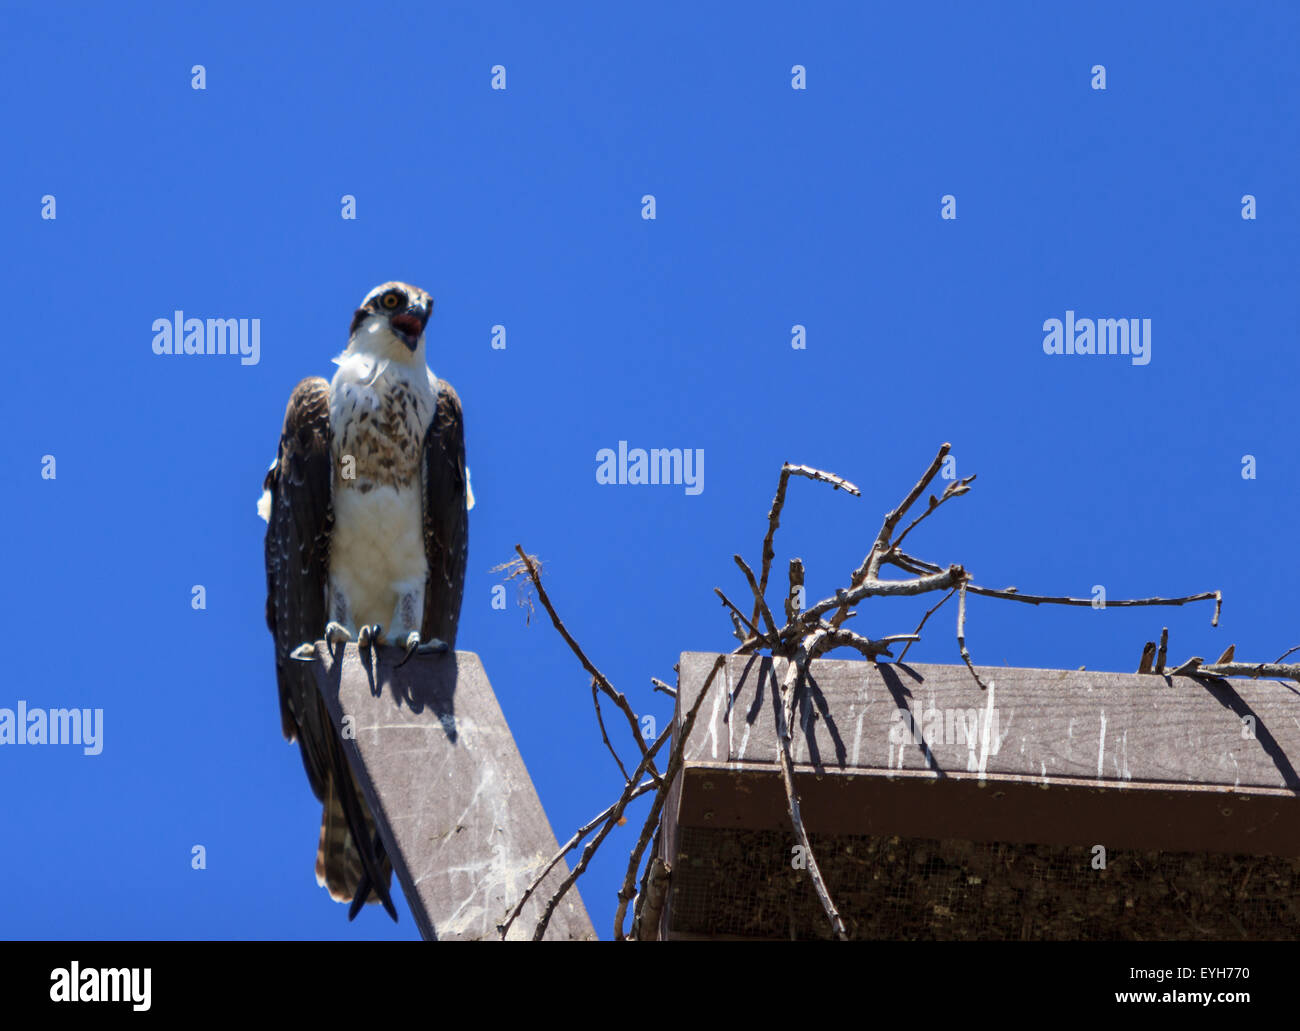 Male osprey bird, Pandion haliaetus, perched on its nest in spring Stock Photo